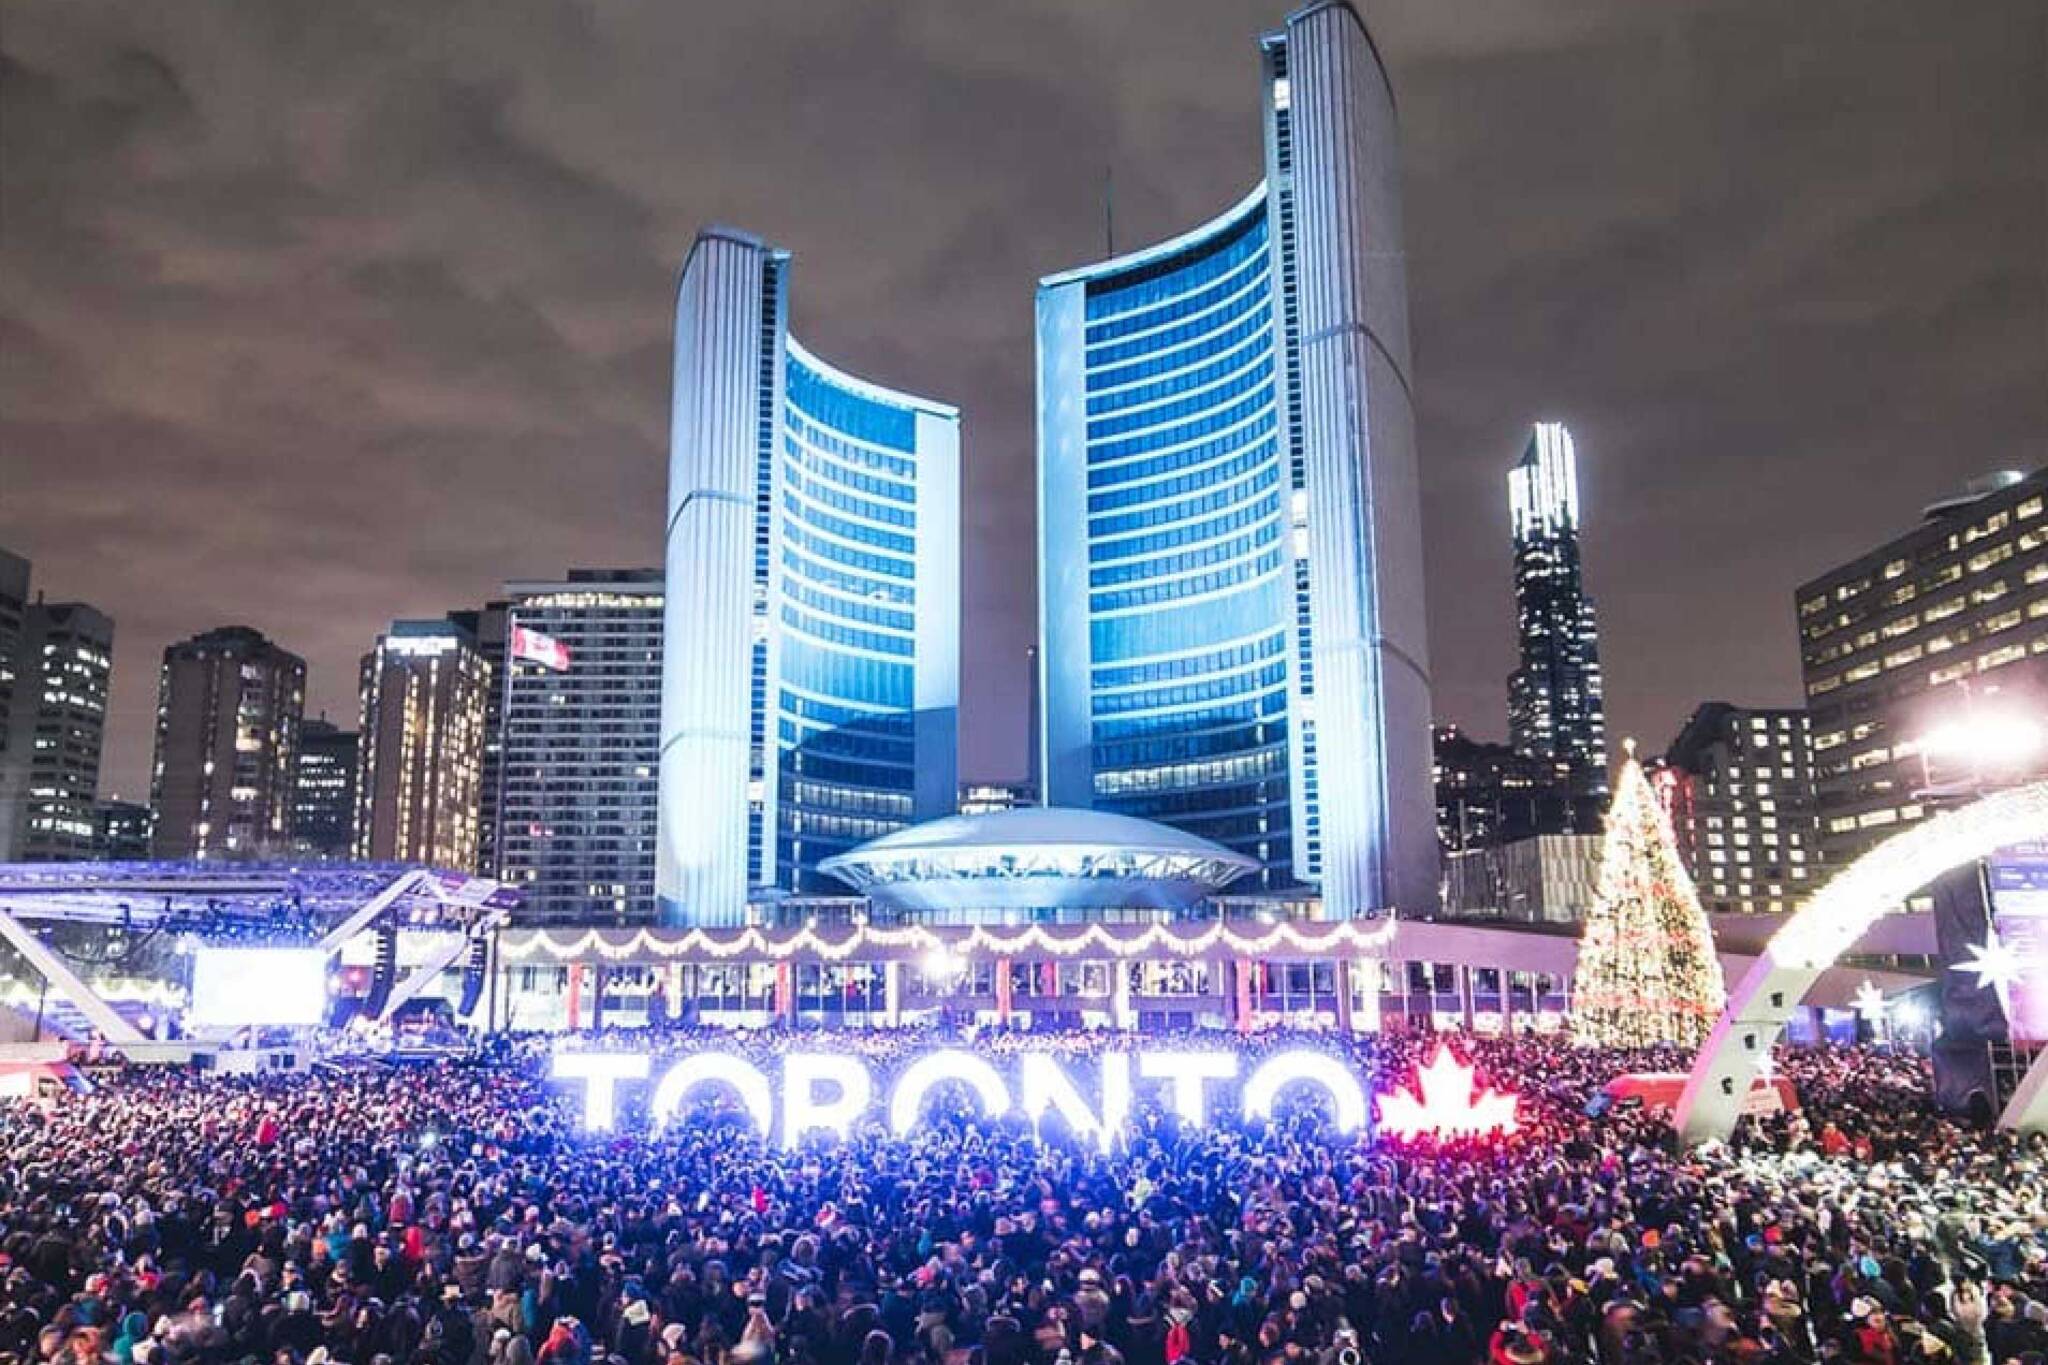 10 free things to do on New Year's Eve in Toronto to ring in 2020